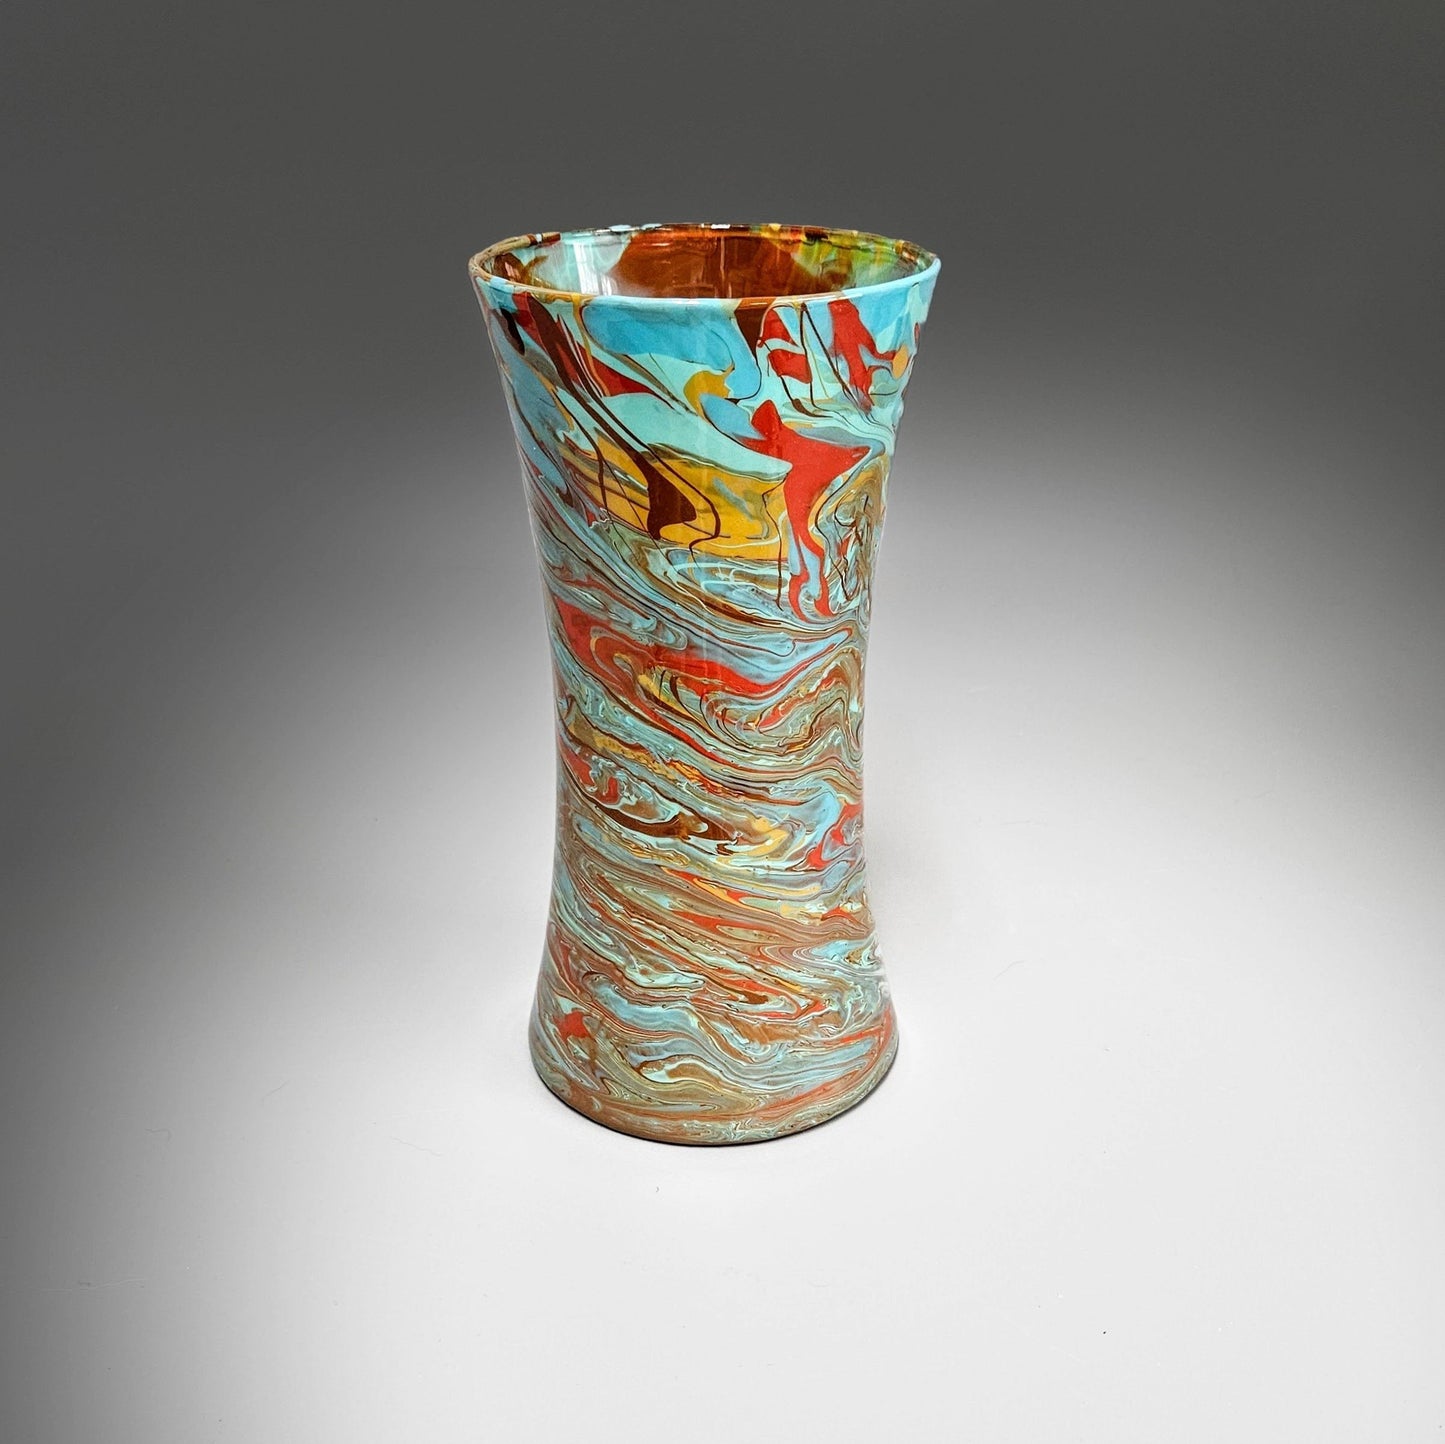 Abstract Painted Glass Vase in Southwest Colors